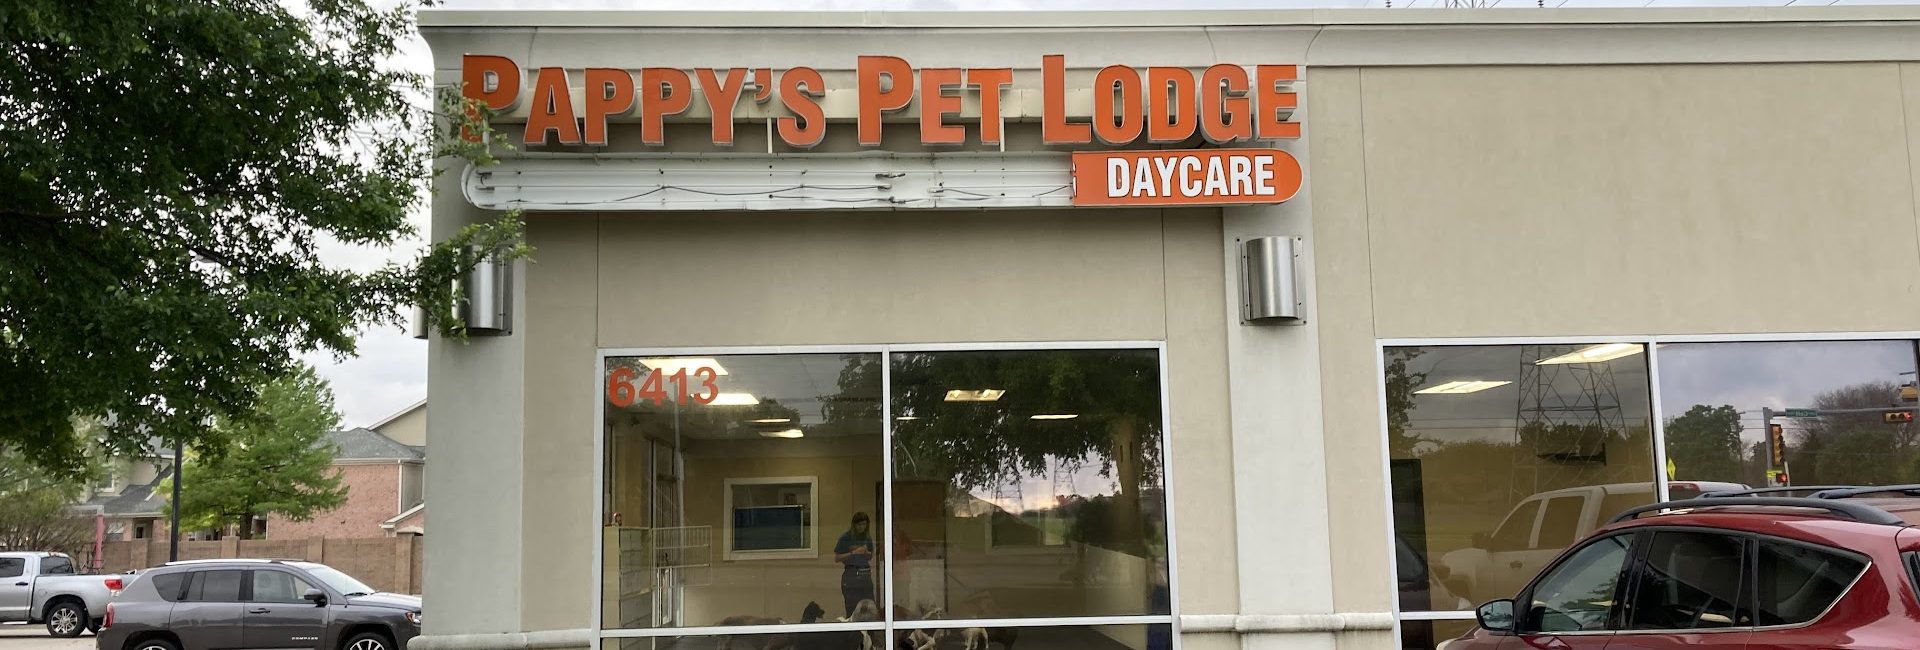 Pappy’s Pet Lodge – N. Plano 4